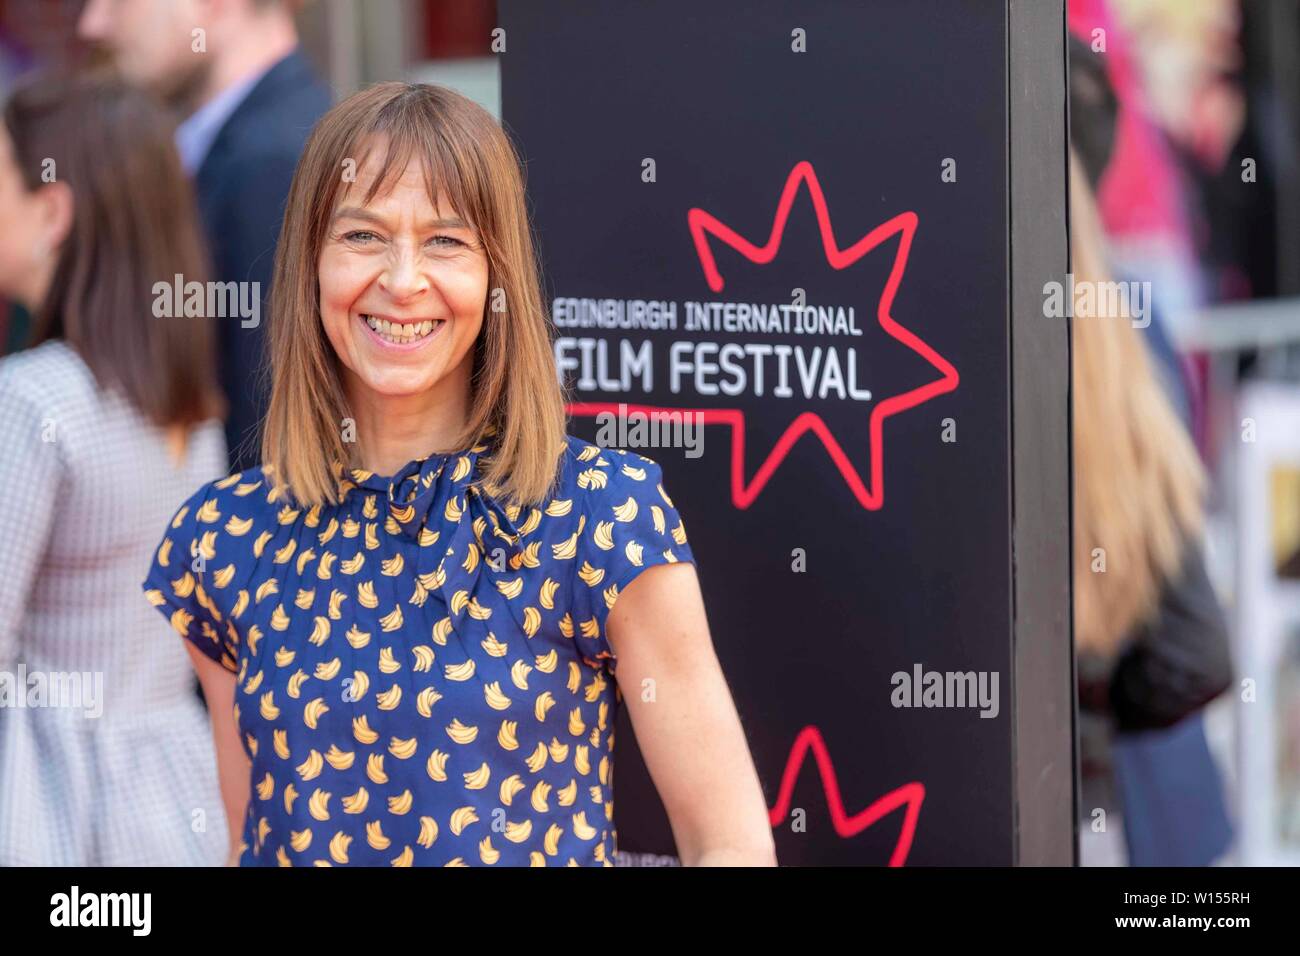 Edinburgh, UK. 30th June, 2019. The 2019 Edinburgh International Film Festival is brought to a close with the World Premiere of Mrs Lowry & Son starring Venessa Redgrave & Timothy Spall. Pictured: Kate Dickie Credit: Rich Dyson/Alamy Live News Stock Photo